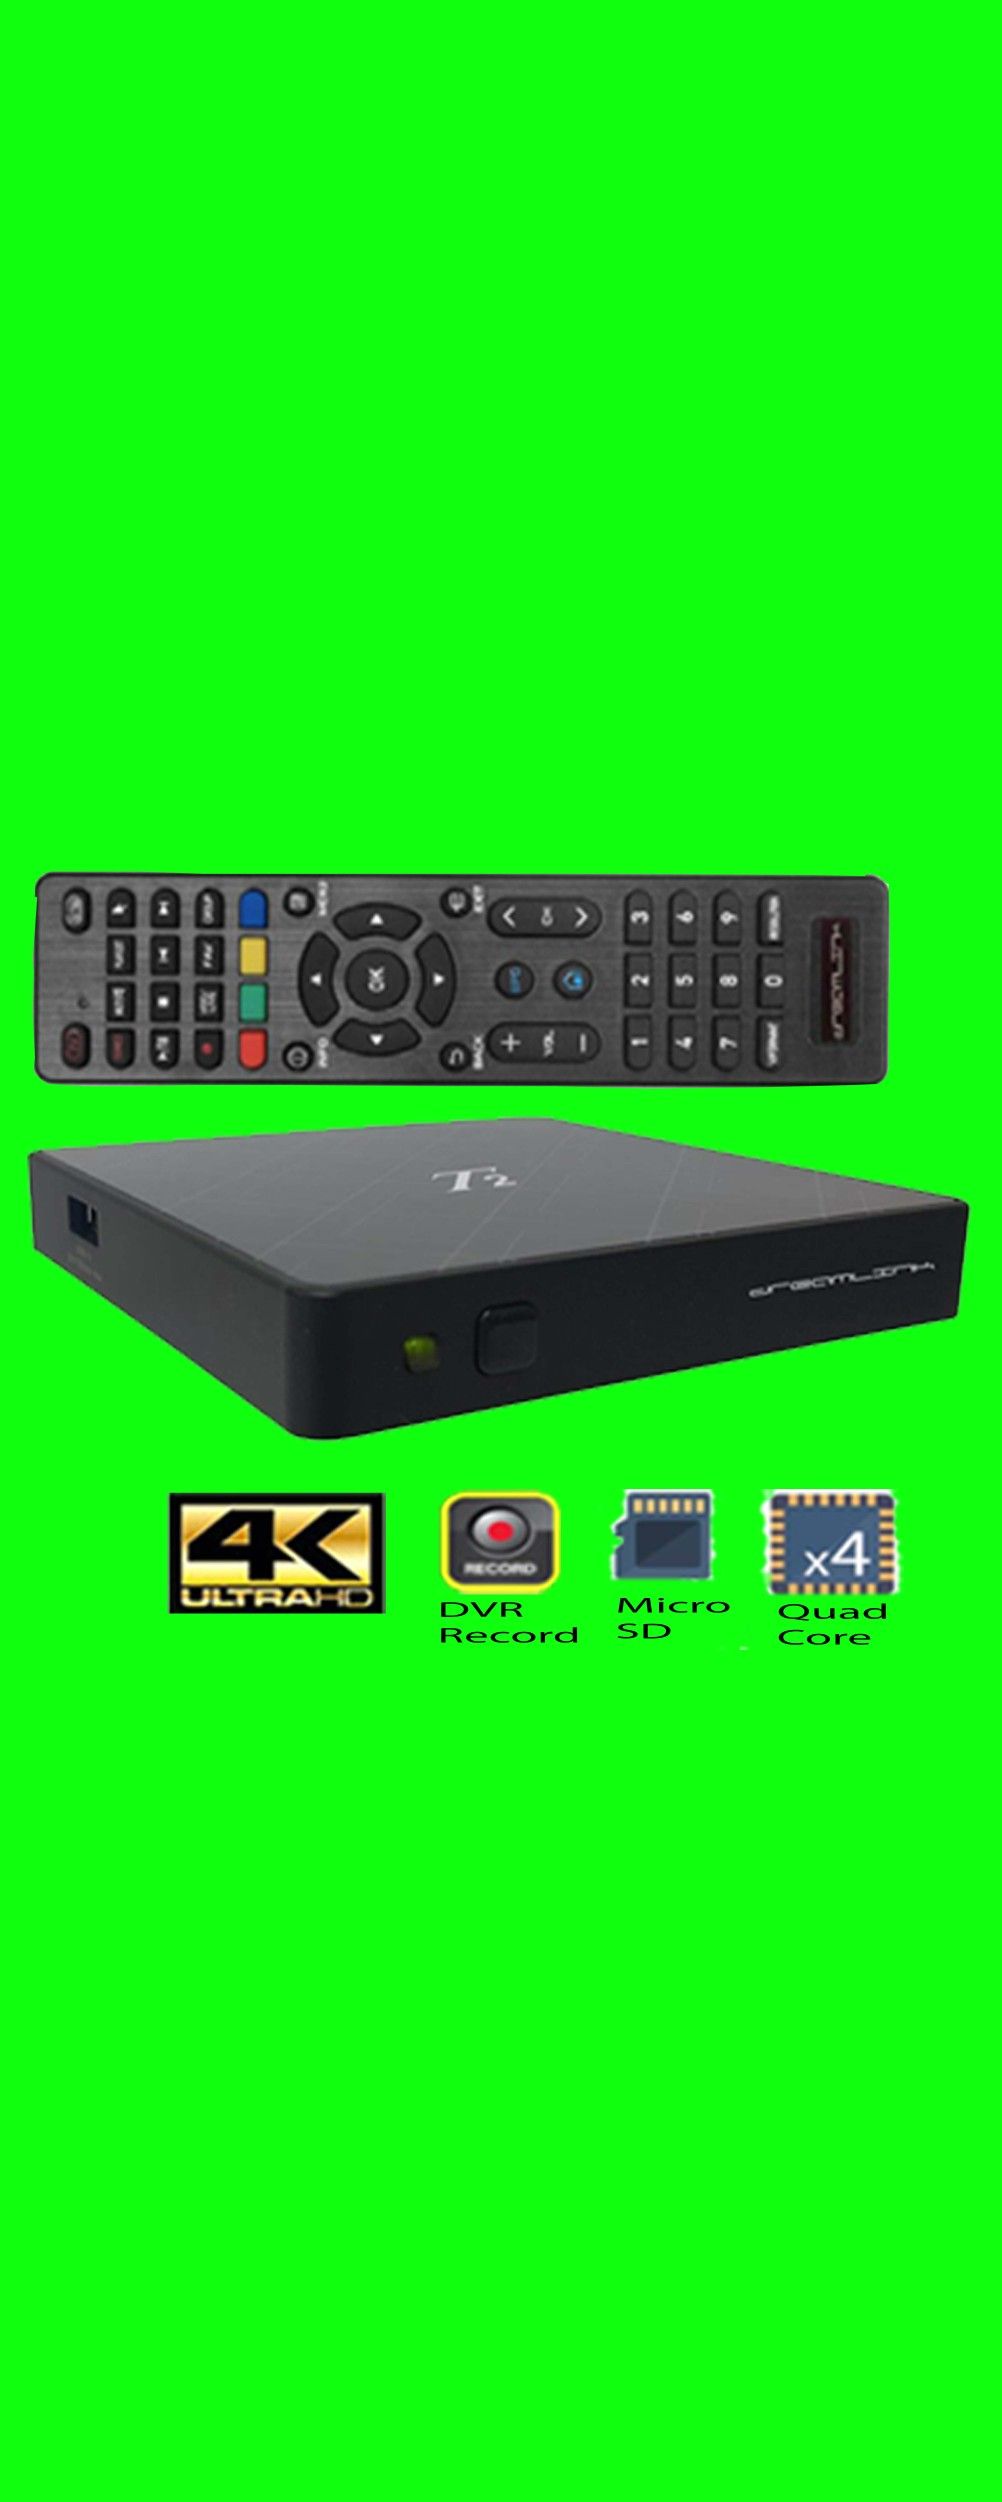 K ìck thé cable bíll !! … l○aded 4K Cable Box 1K+ HD Prime channels +DVR Rec○rder… Not a l○w quality amazon android fire TV stick or iptv china box.